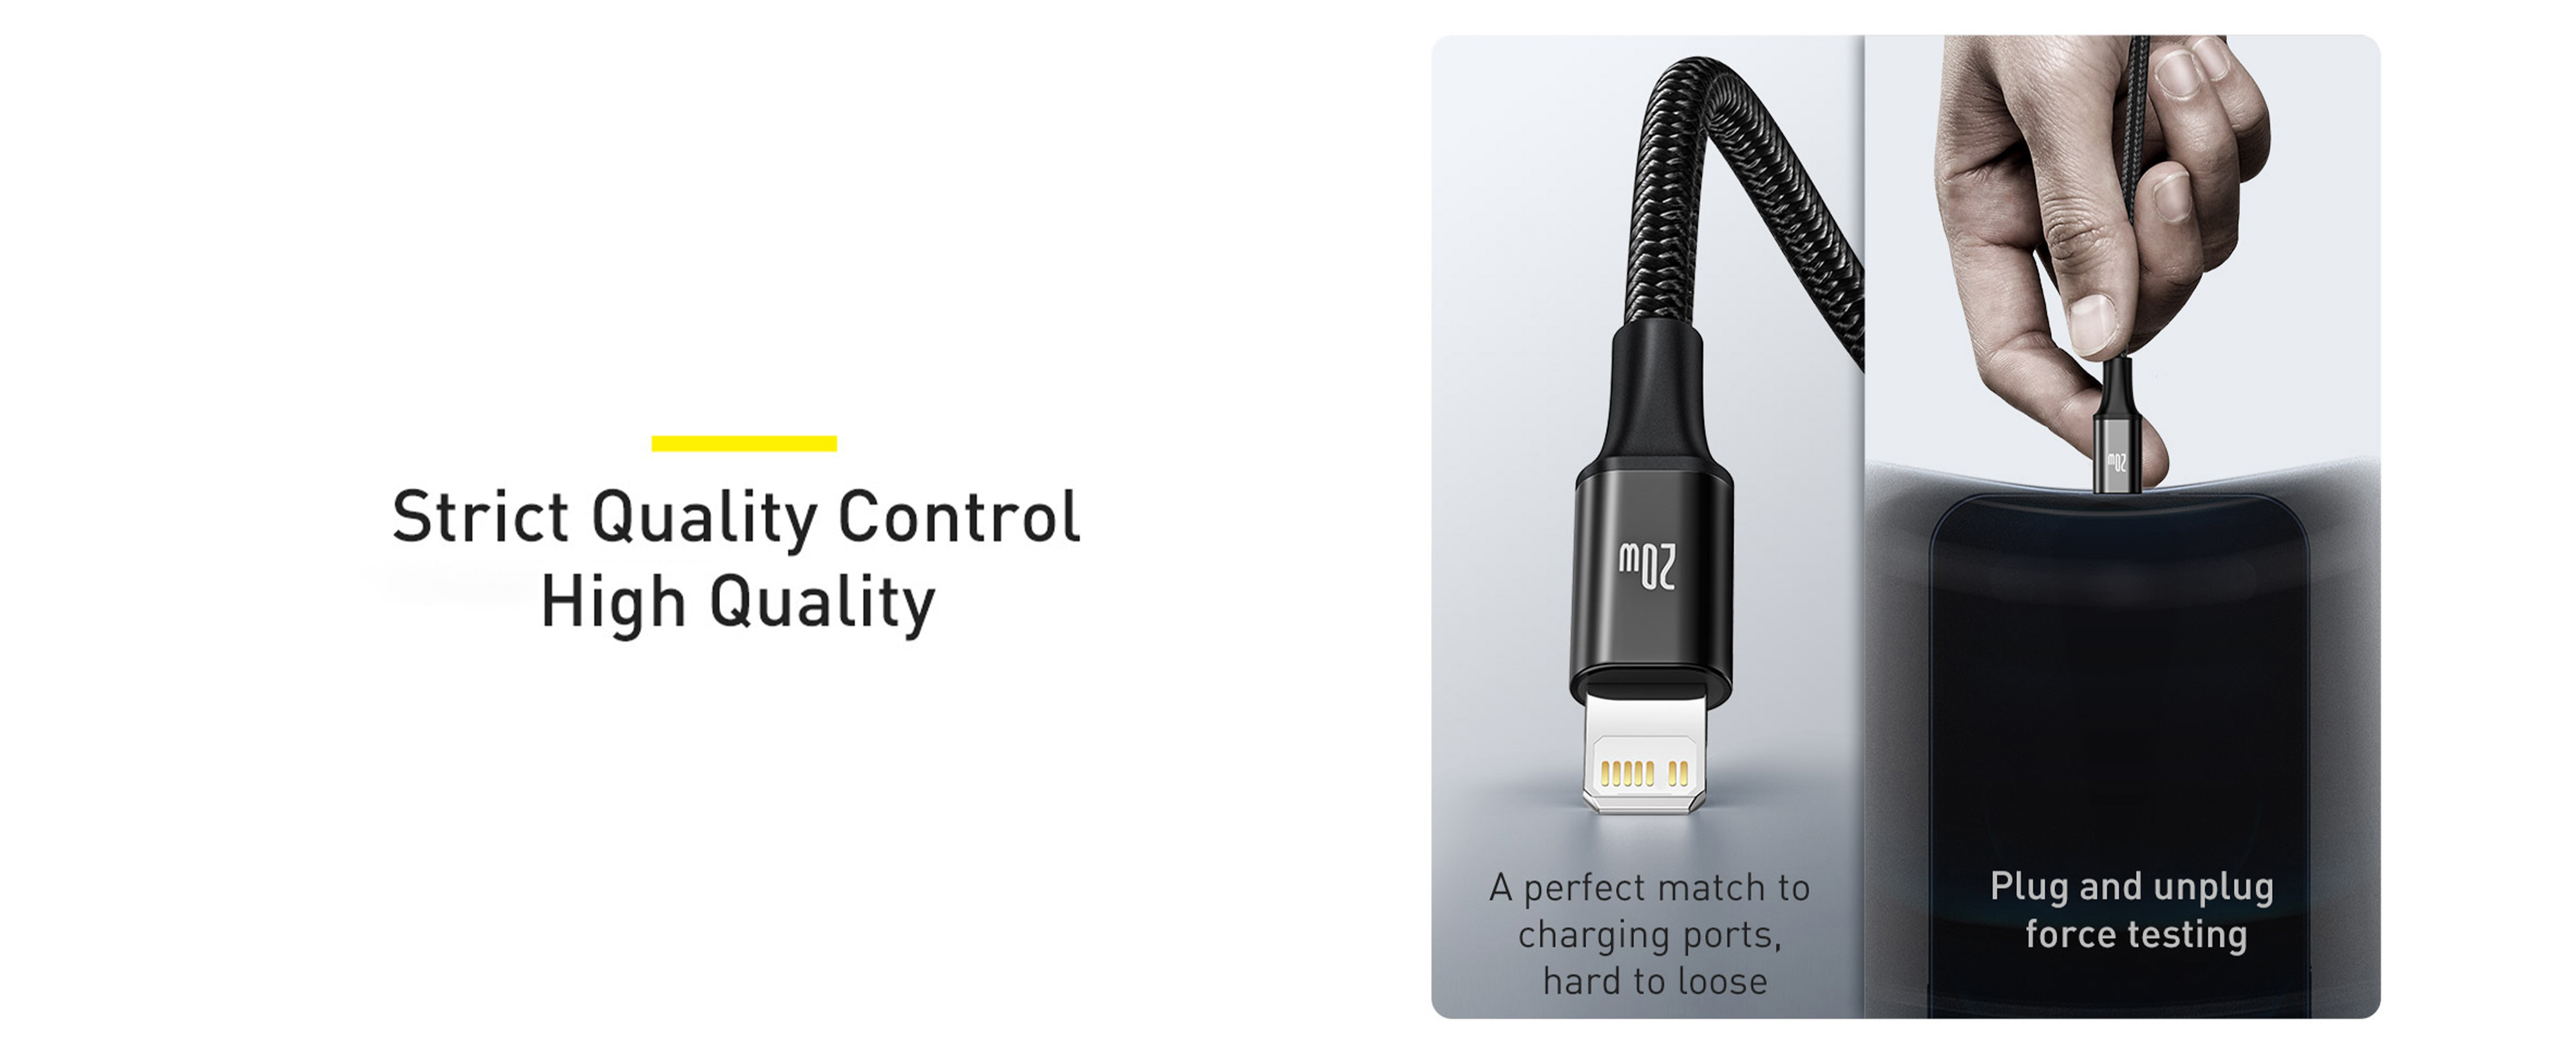 BASEUS Rapid Series 3-in-1 Fast Charging Data Cable Type-C to M+L+C PD 20W 1.5m - Black